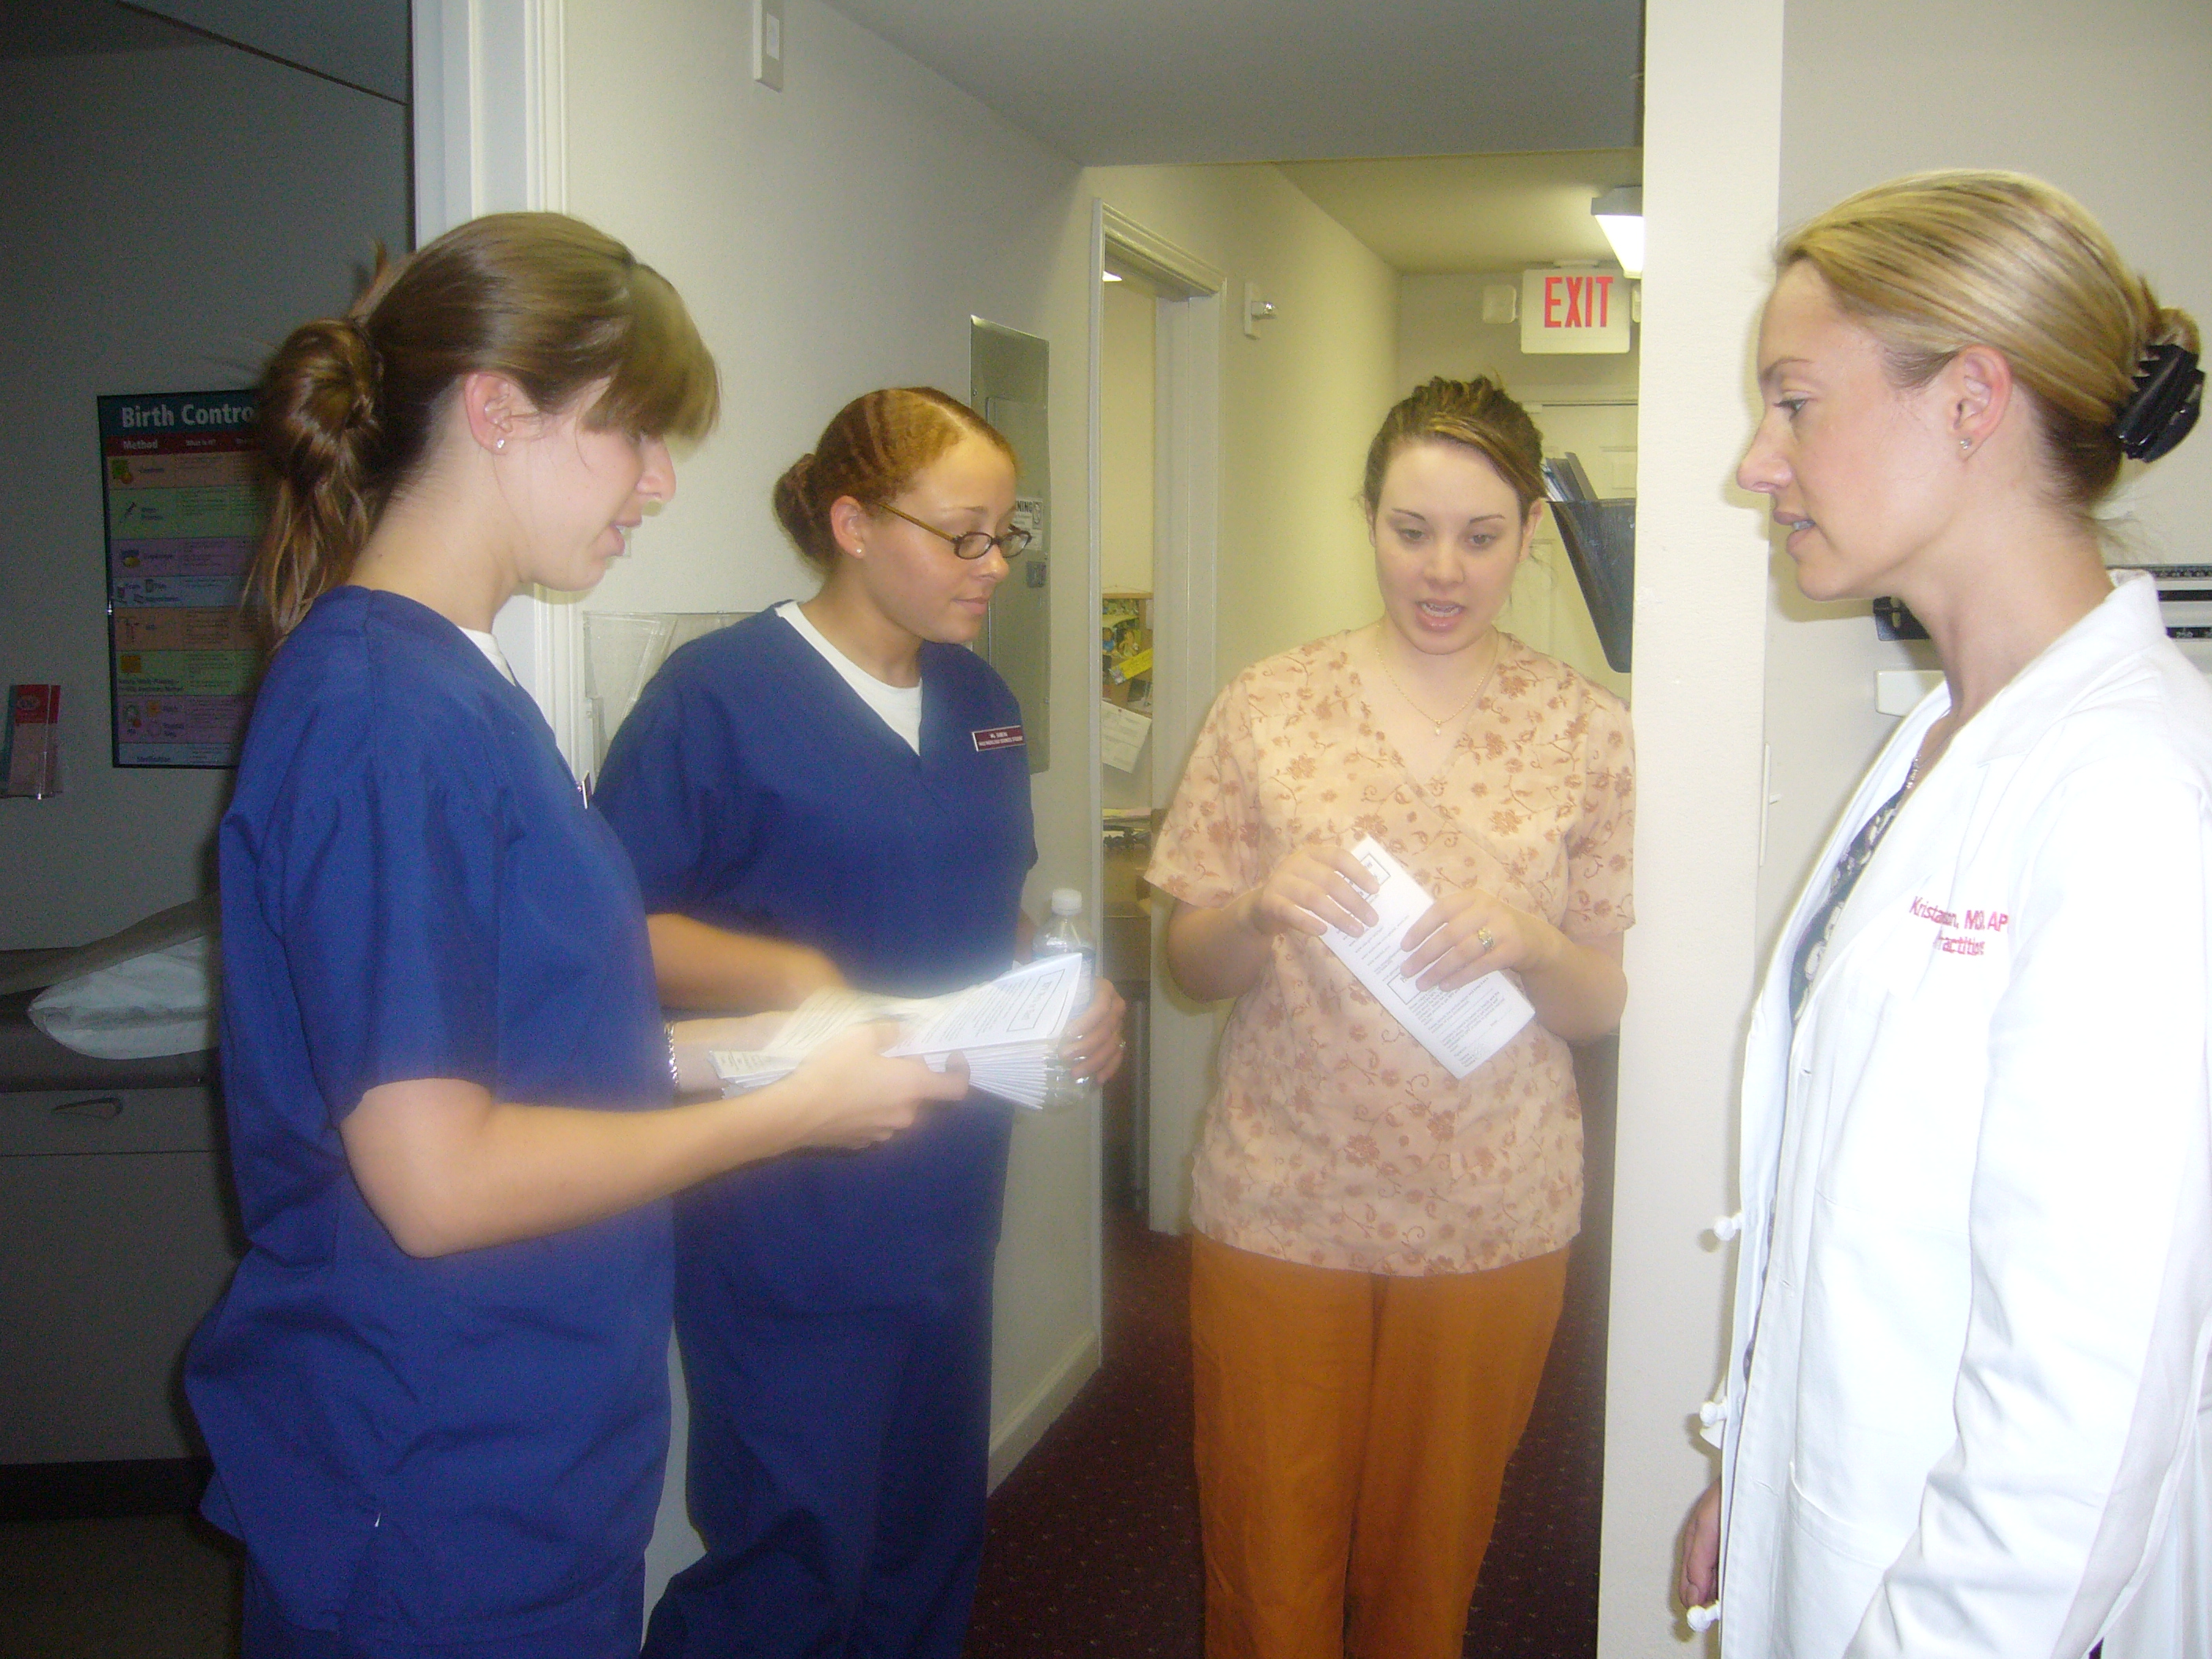 At the Armstrong Atlantic State University exchanging HPV information with Kristen the Health Clinic's nurse practitioner